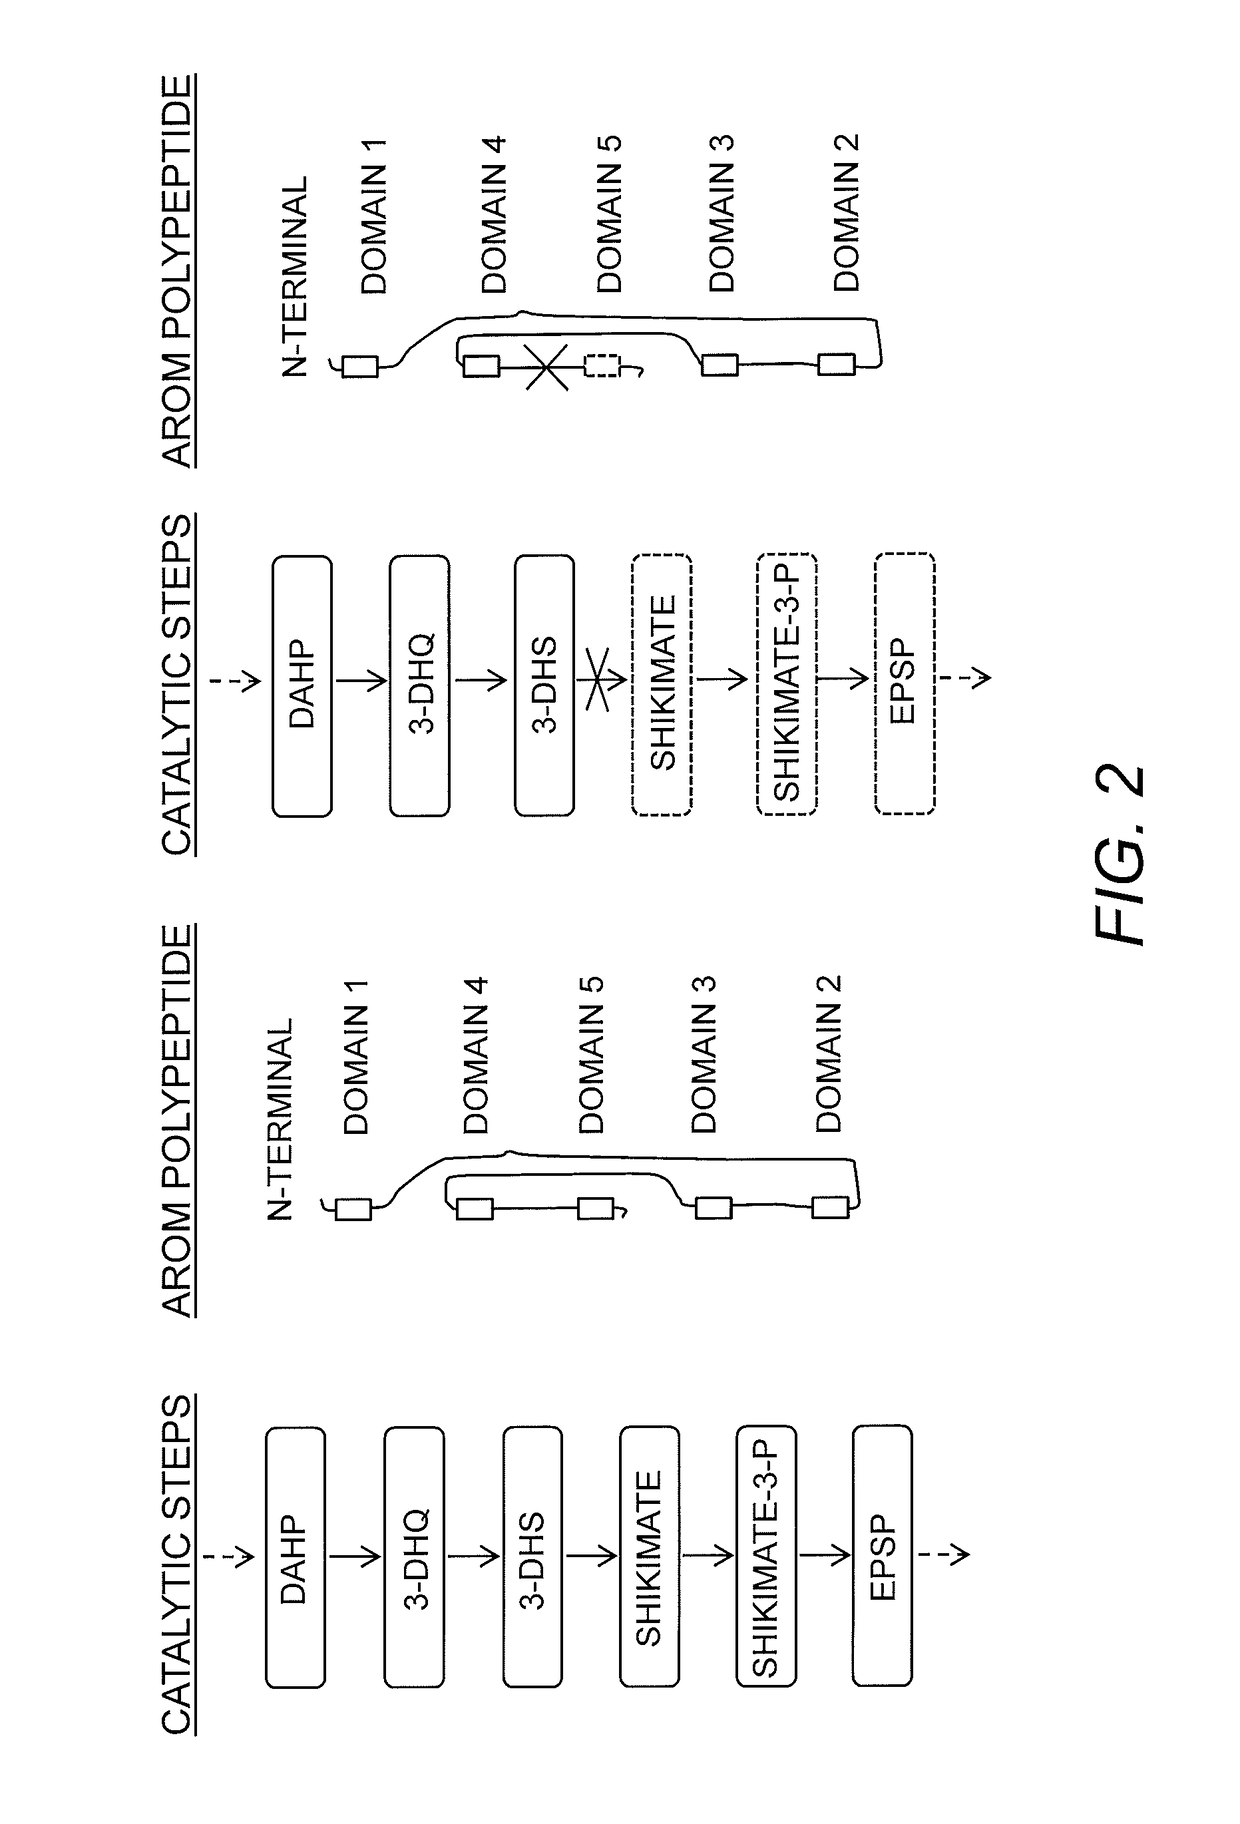 Compositions and methods for the biosynthesis of vanillan or vanillin beta-D-glucoside